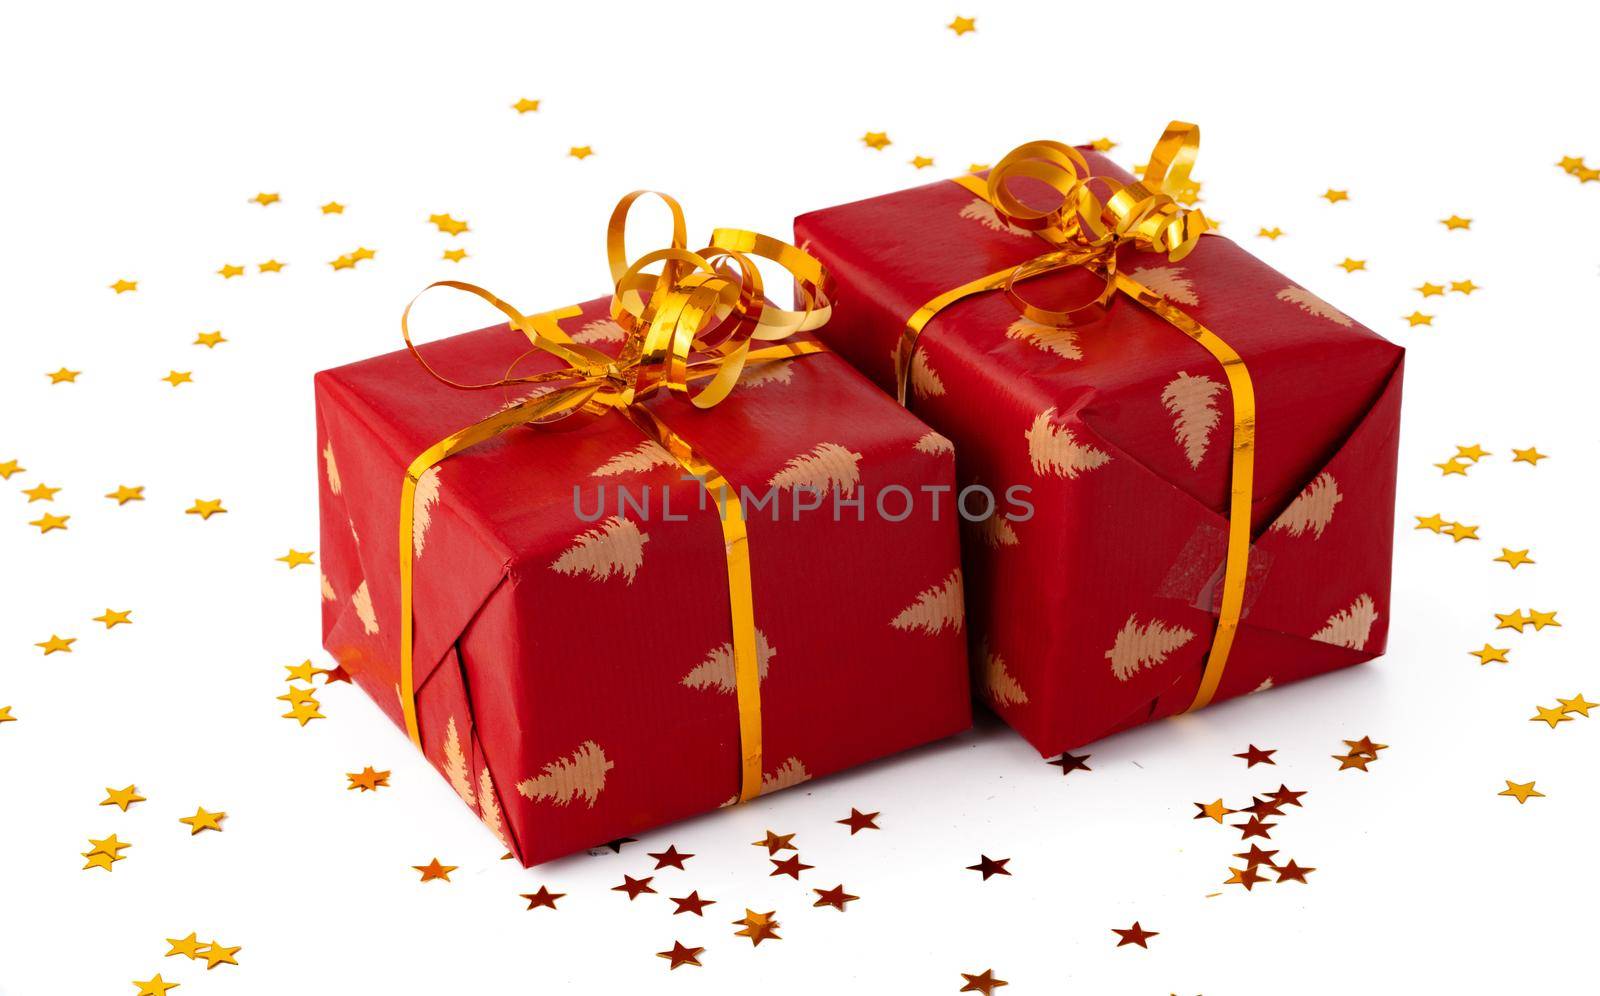 Christmas present gift box with confetti isolated on white background by Fabrikasimf